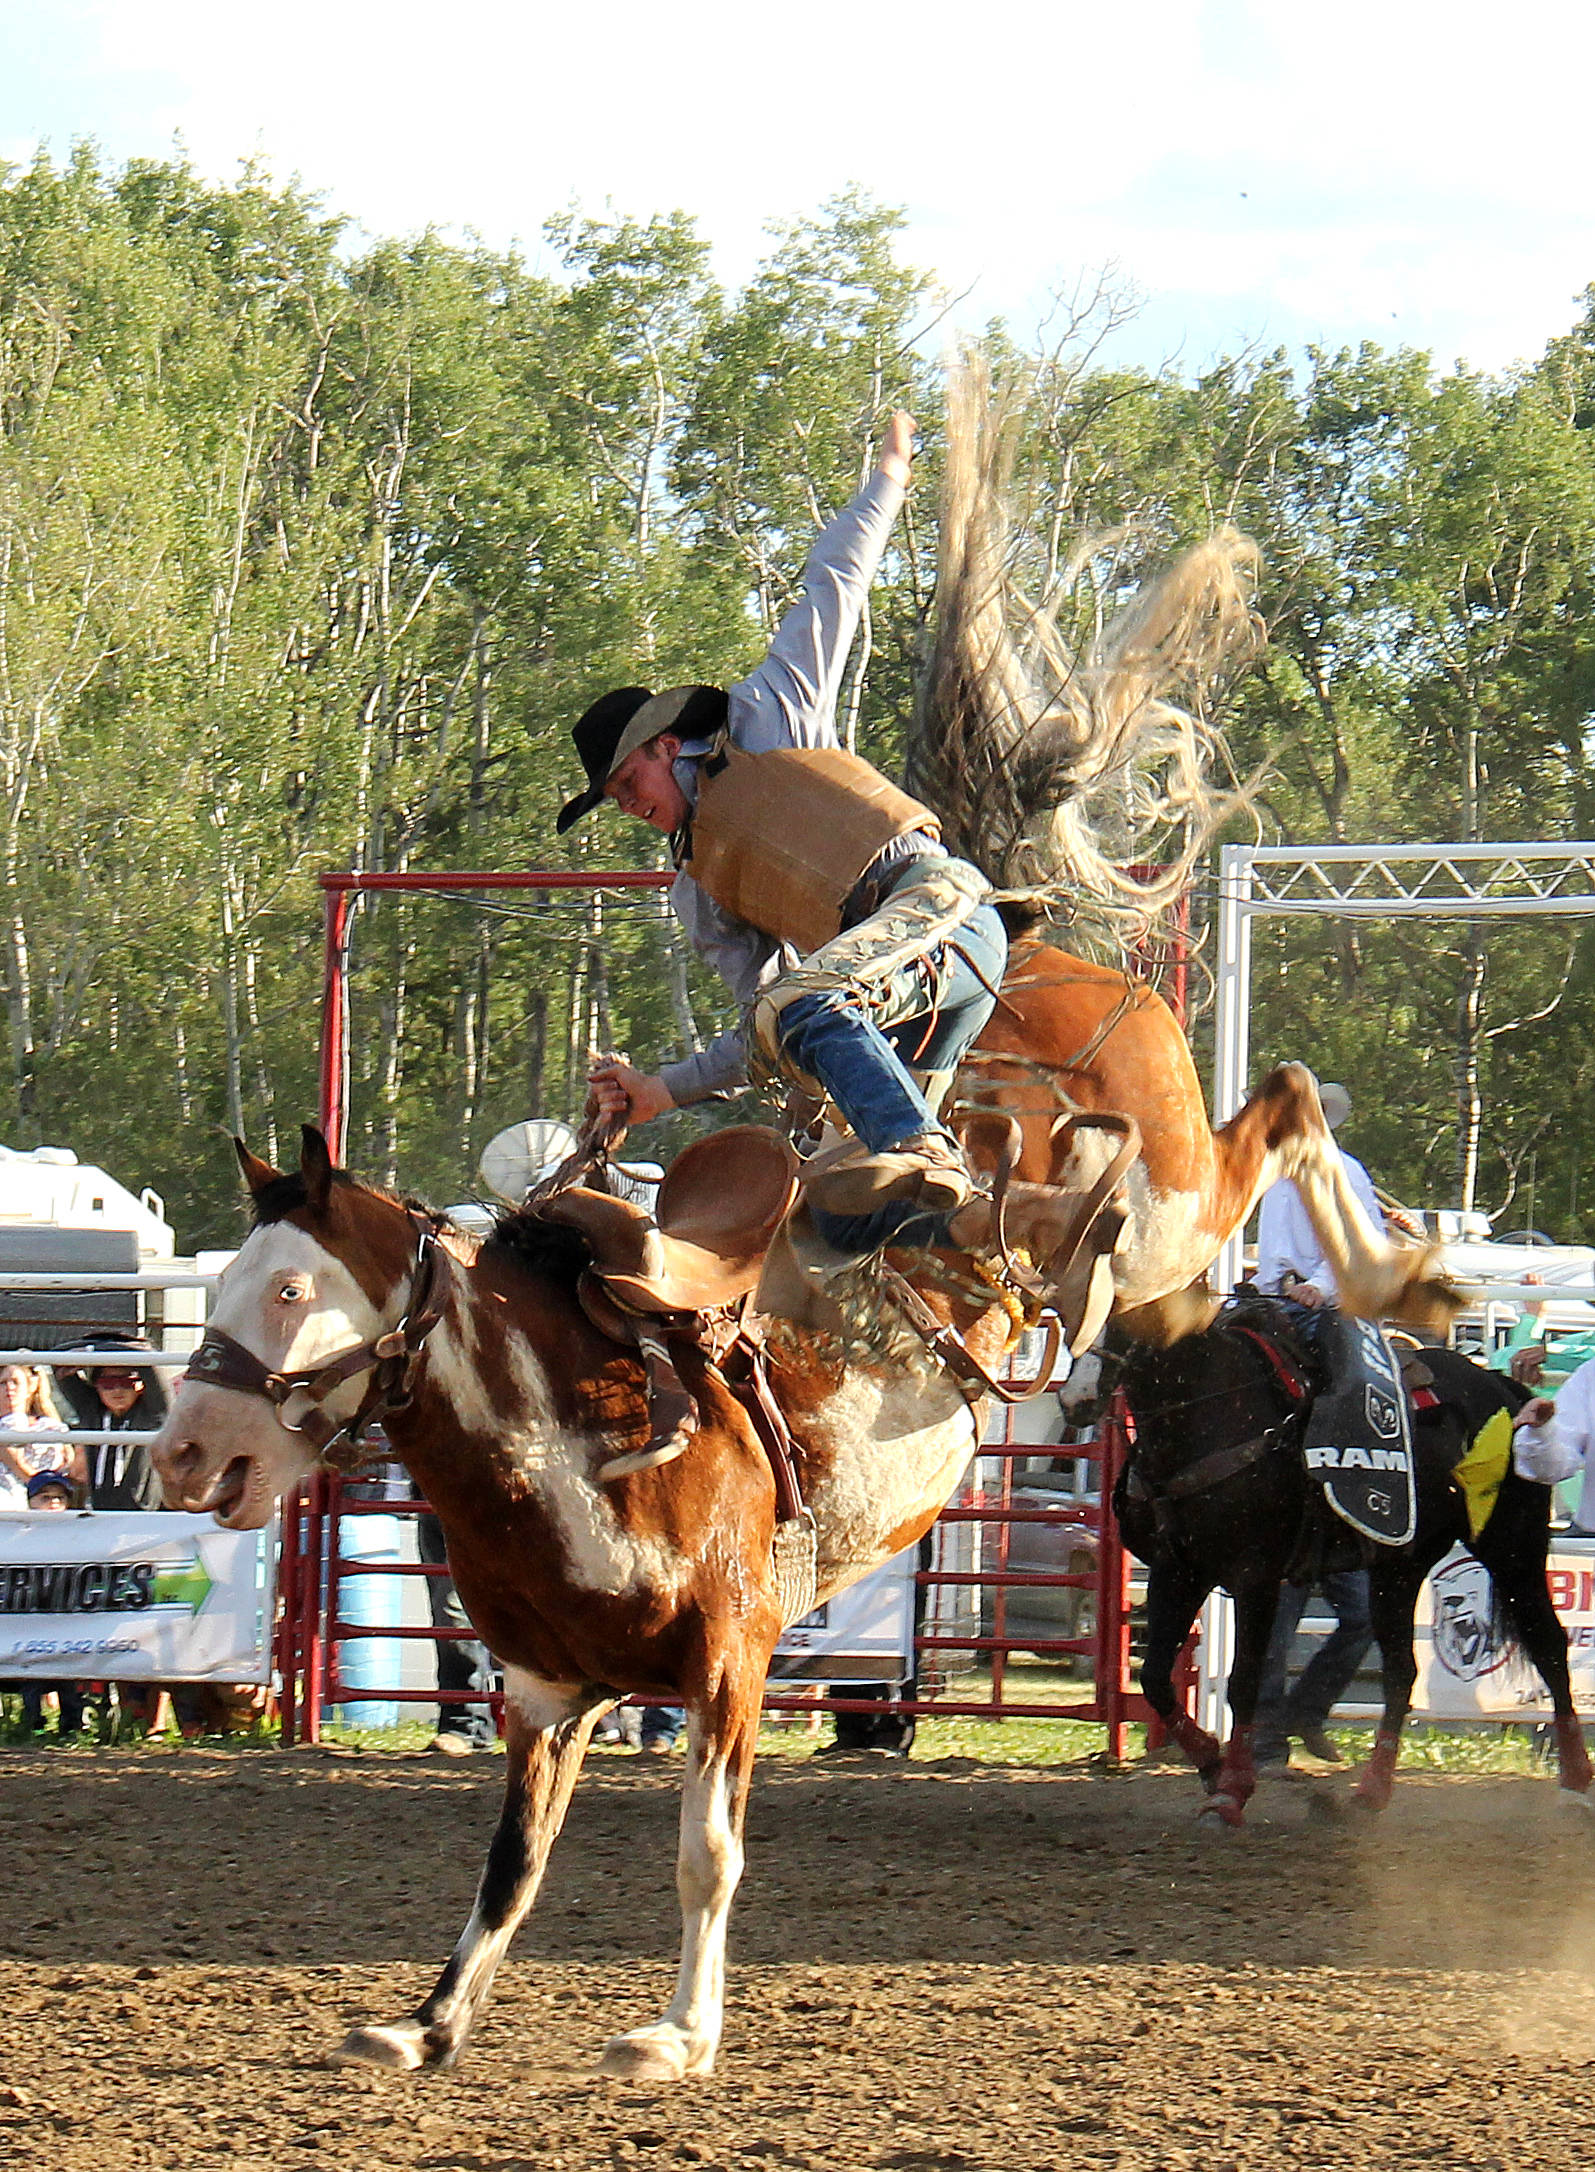 Jake Burwash is bucked from his horse during the novice saddle bronc event at the Benalto Stampede.